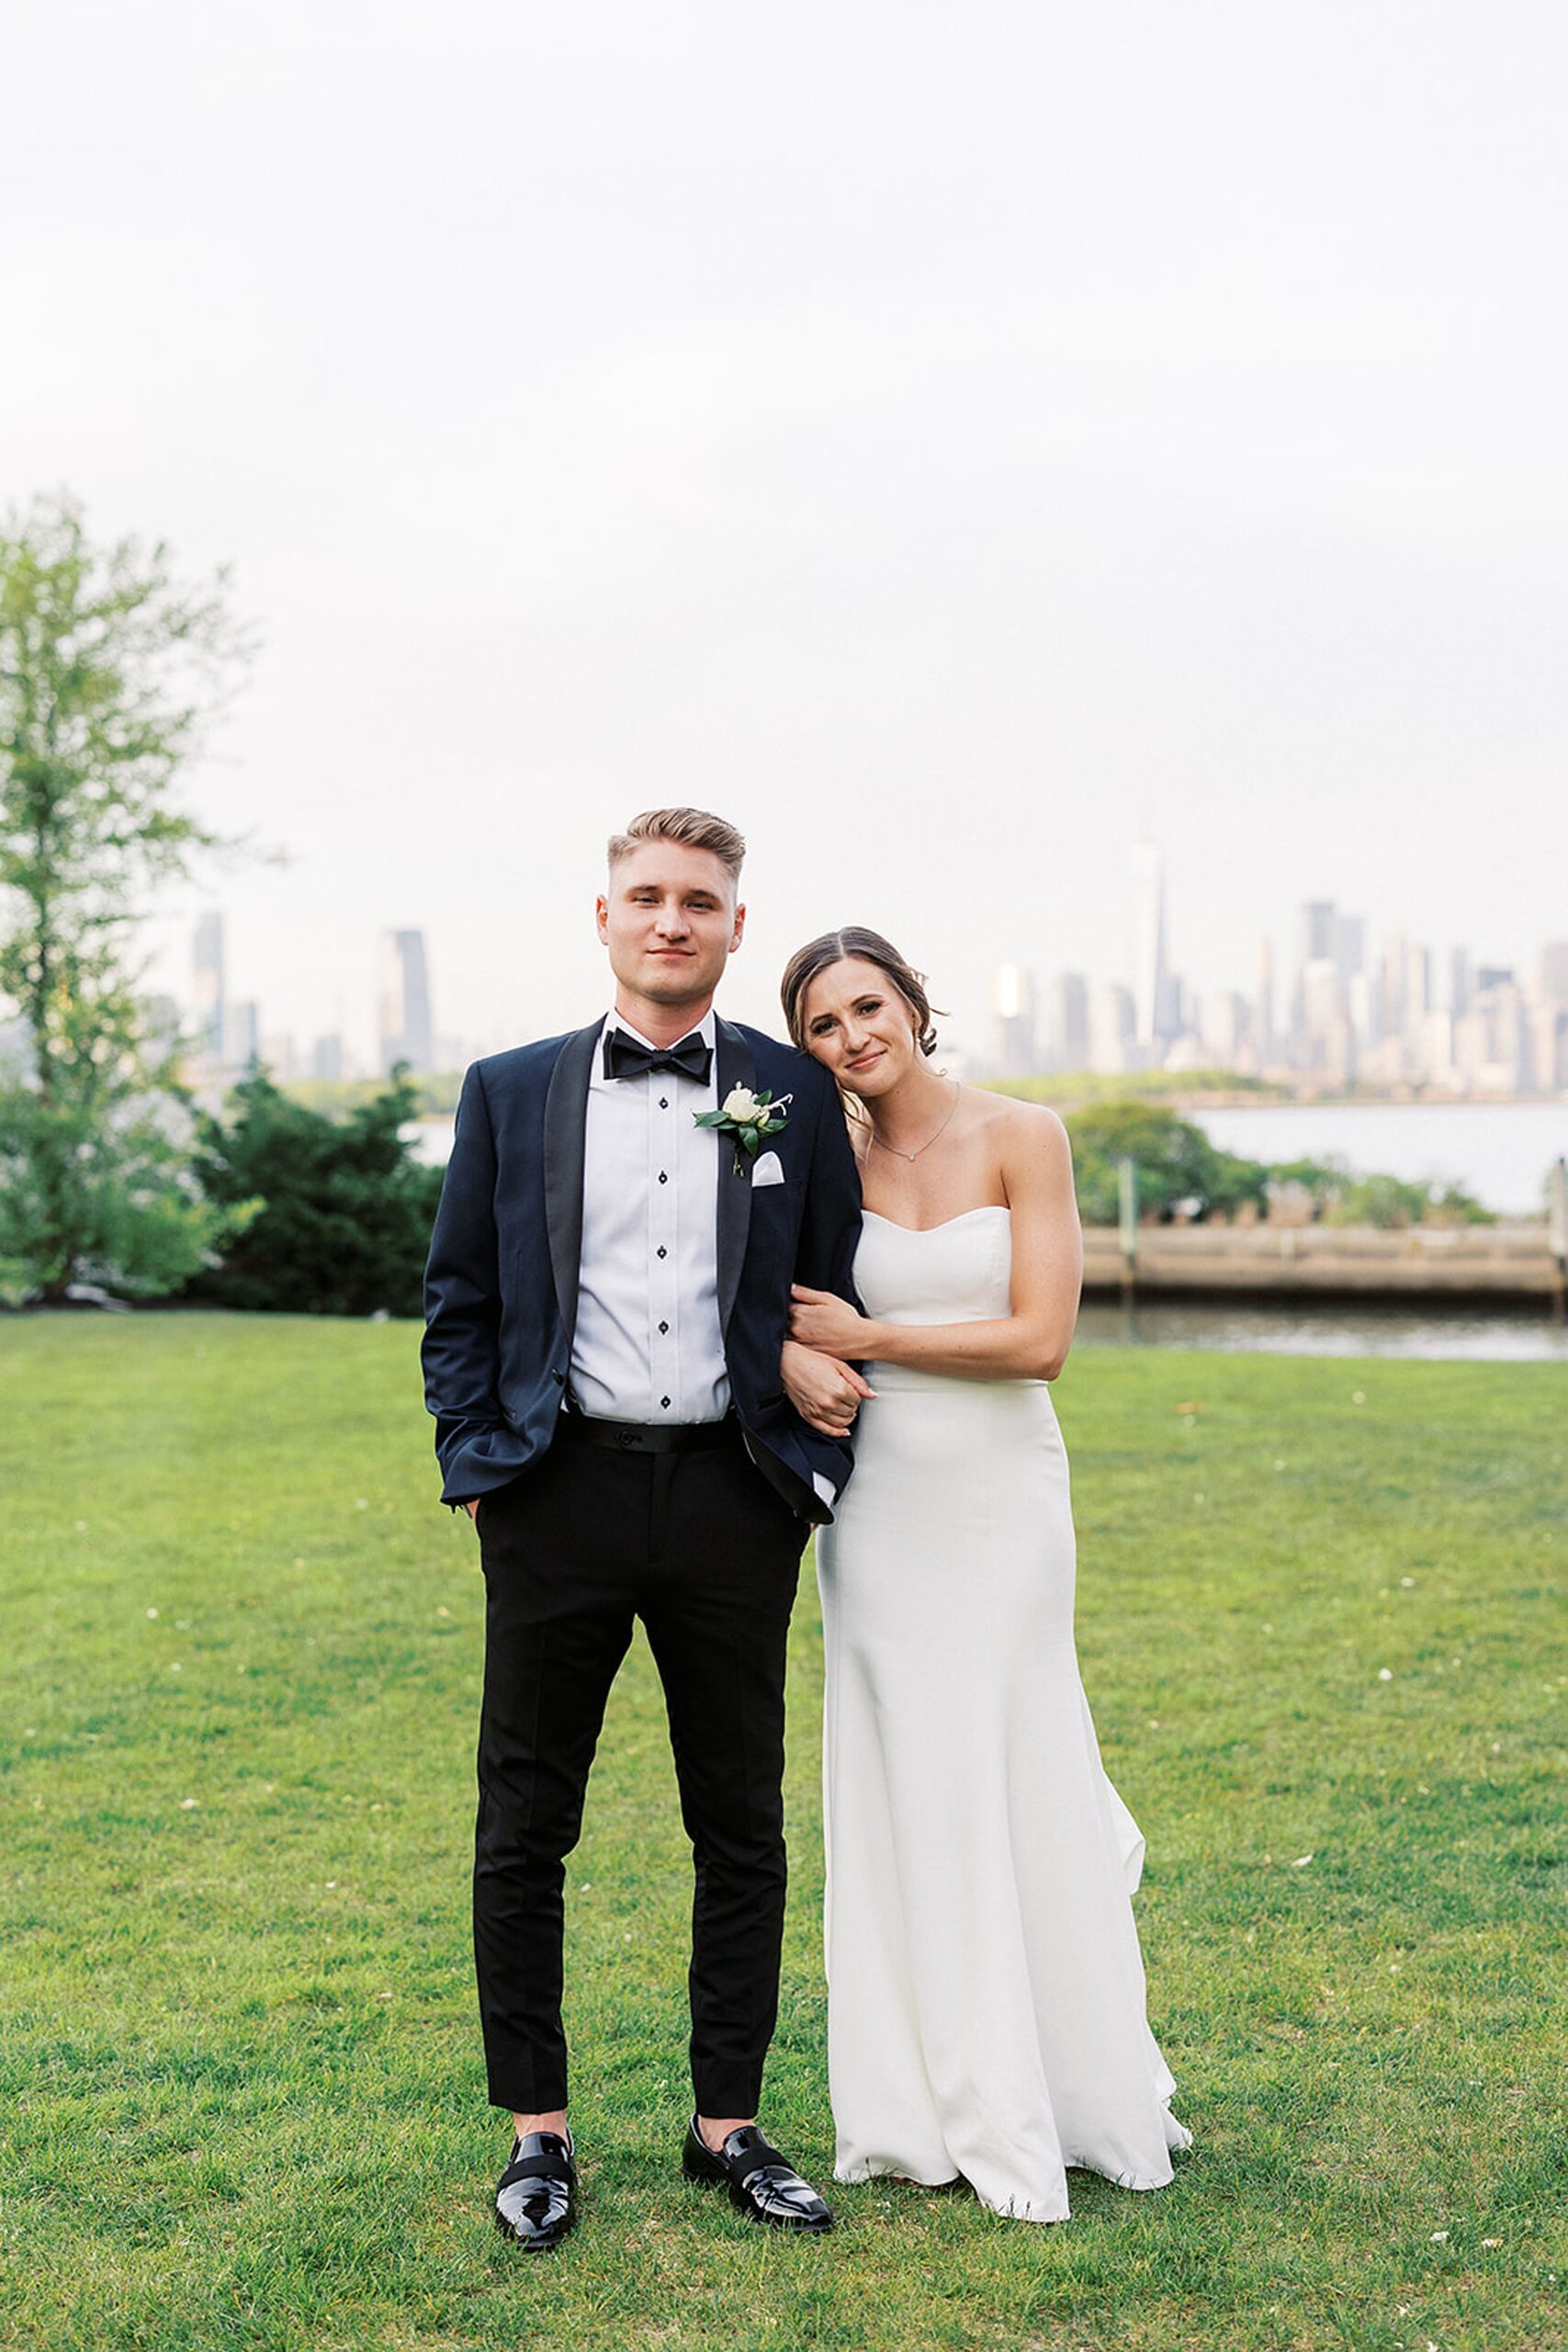 A bride holds onto the arm of her husband in a grassy park with Manhattan in the background